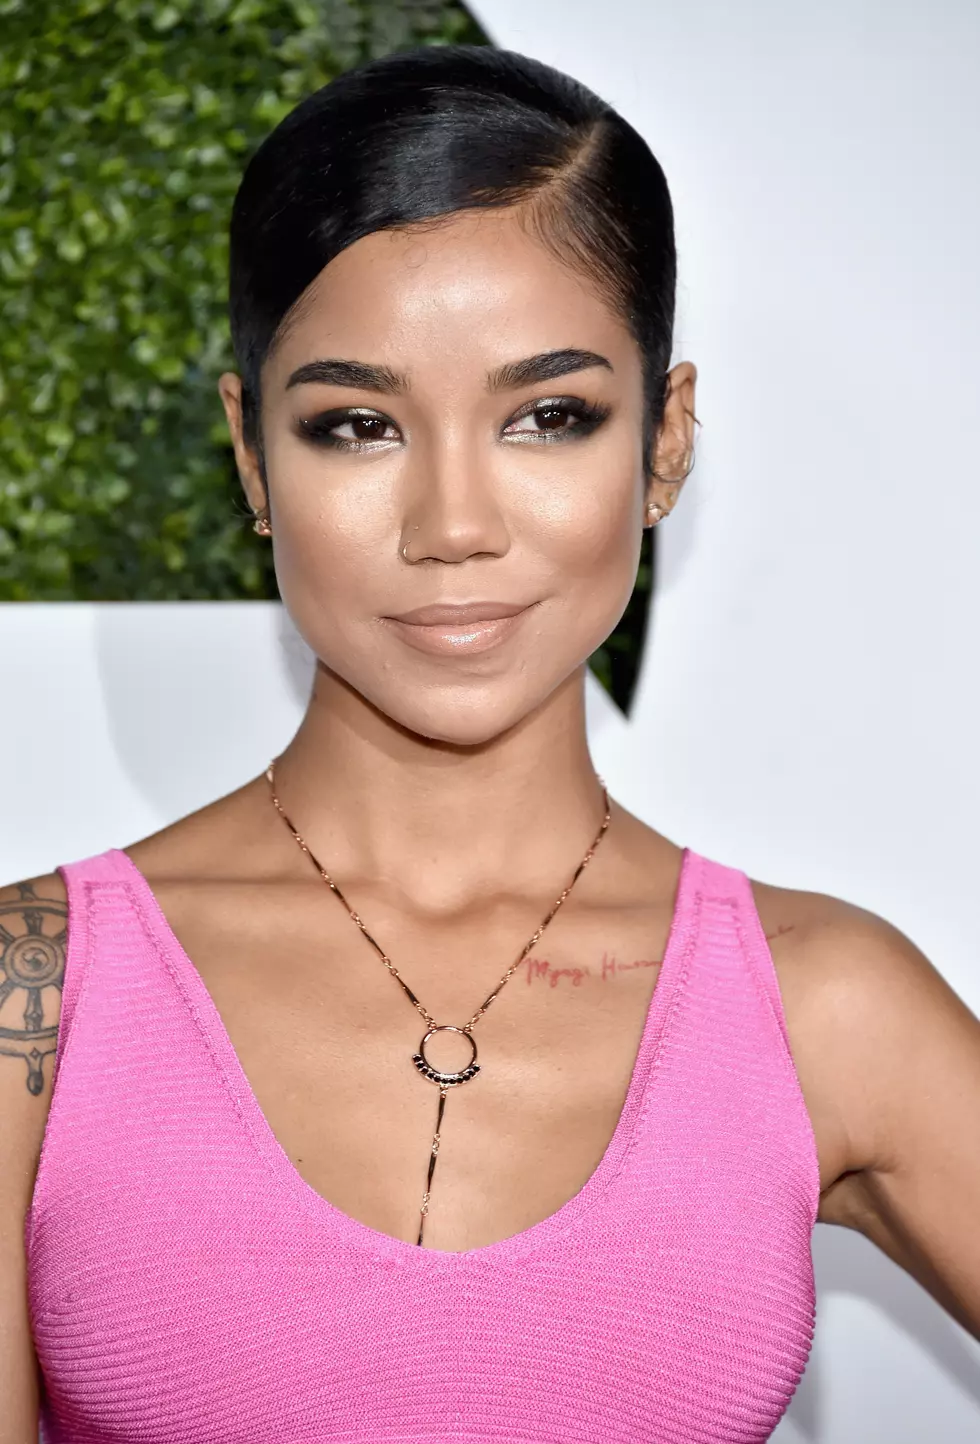 Check Out Jhene Aiko&#8217;s New Single &#8216;B’S &#038; H’S&#8217;